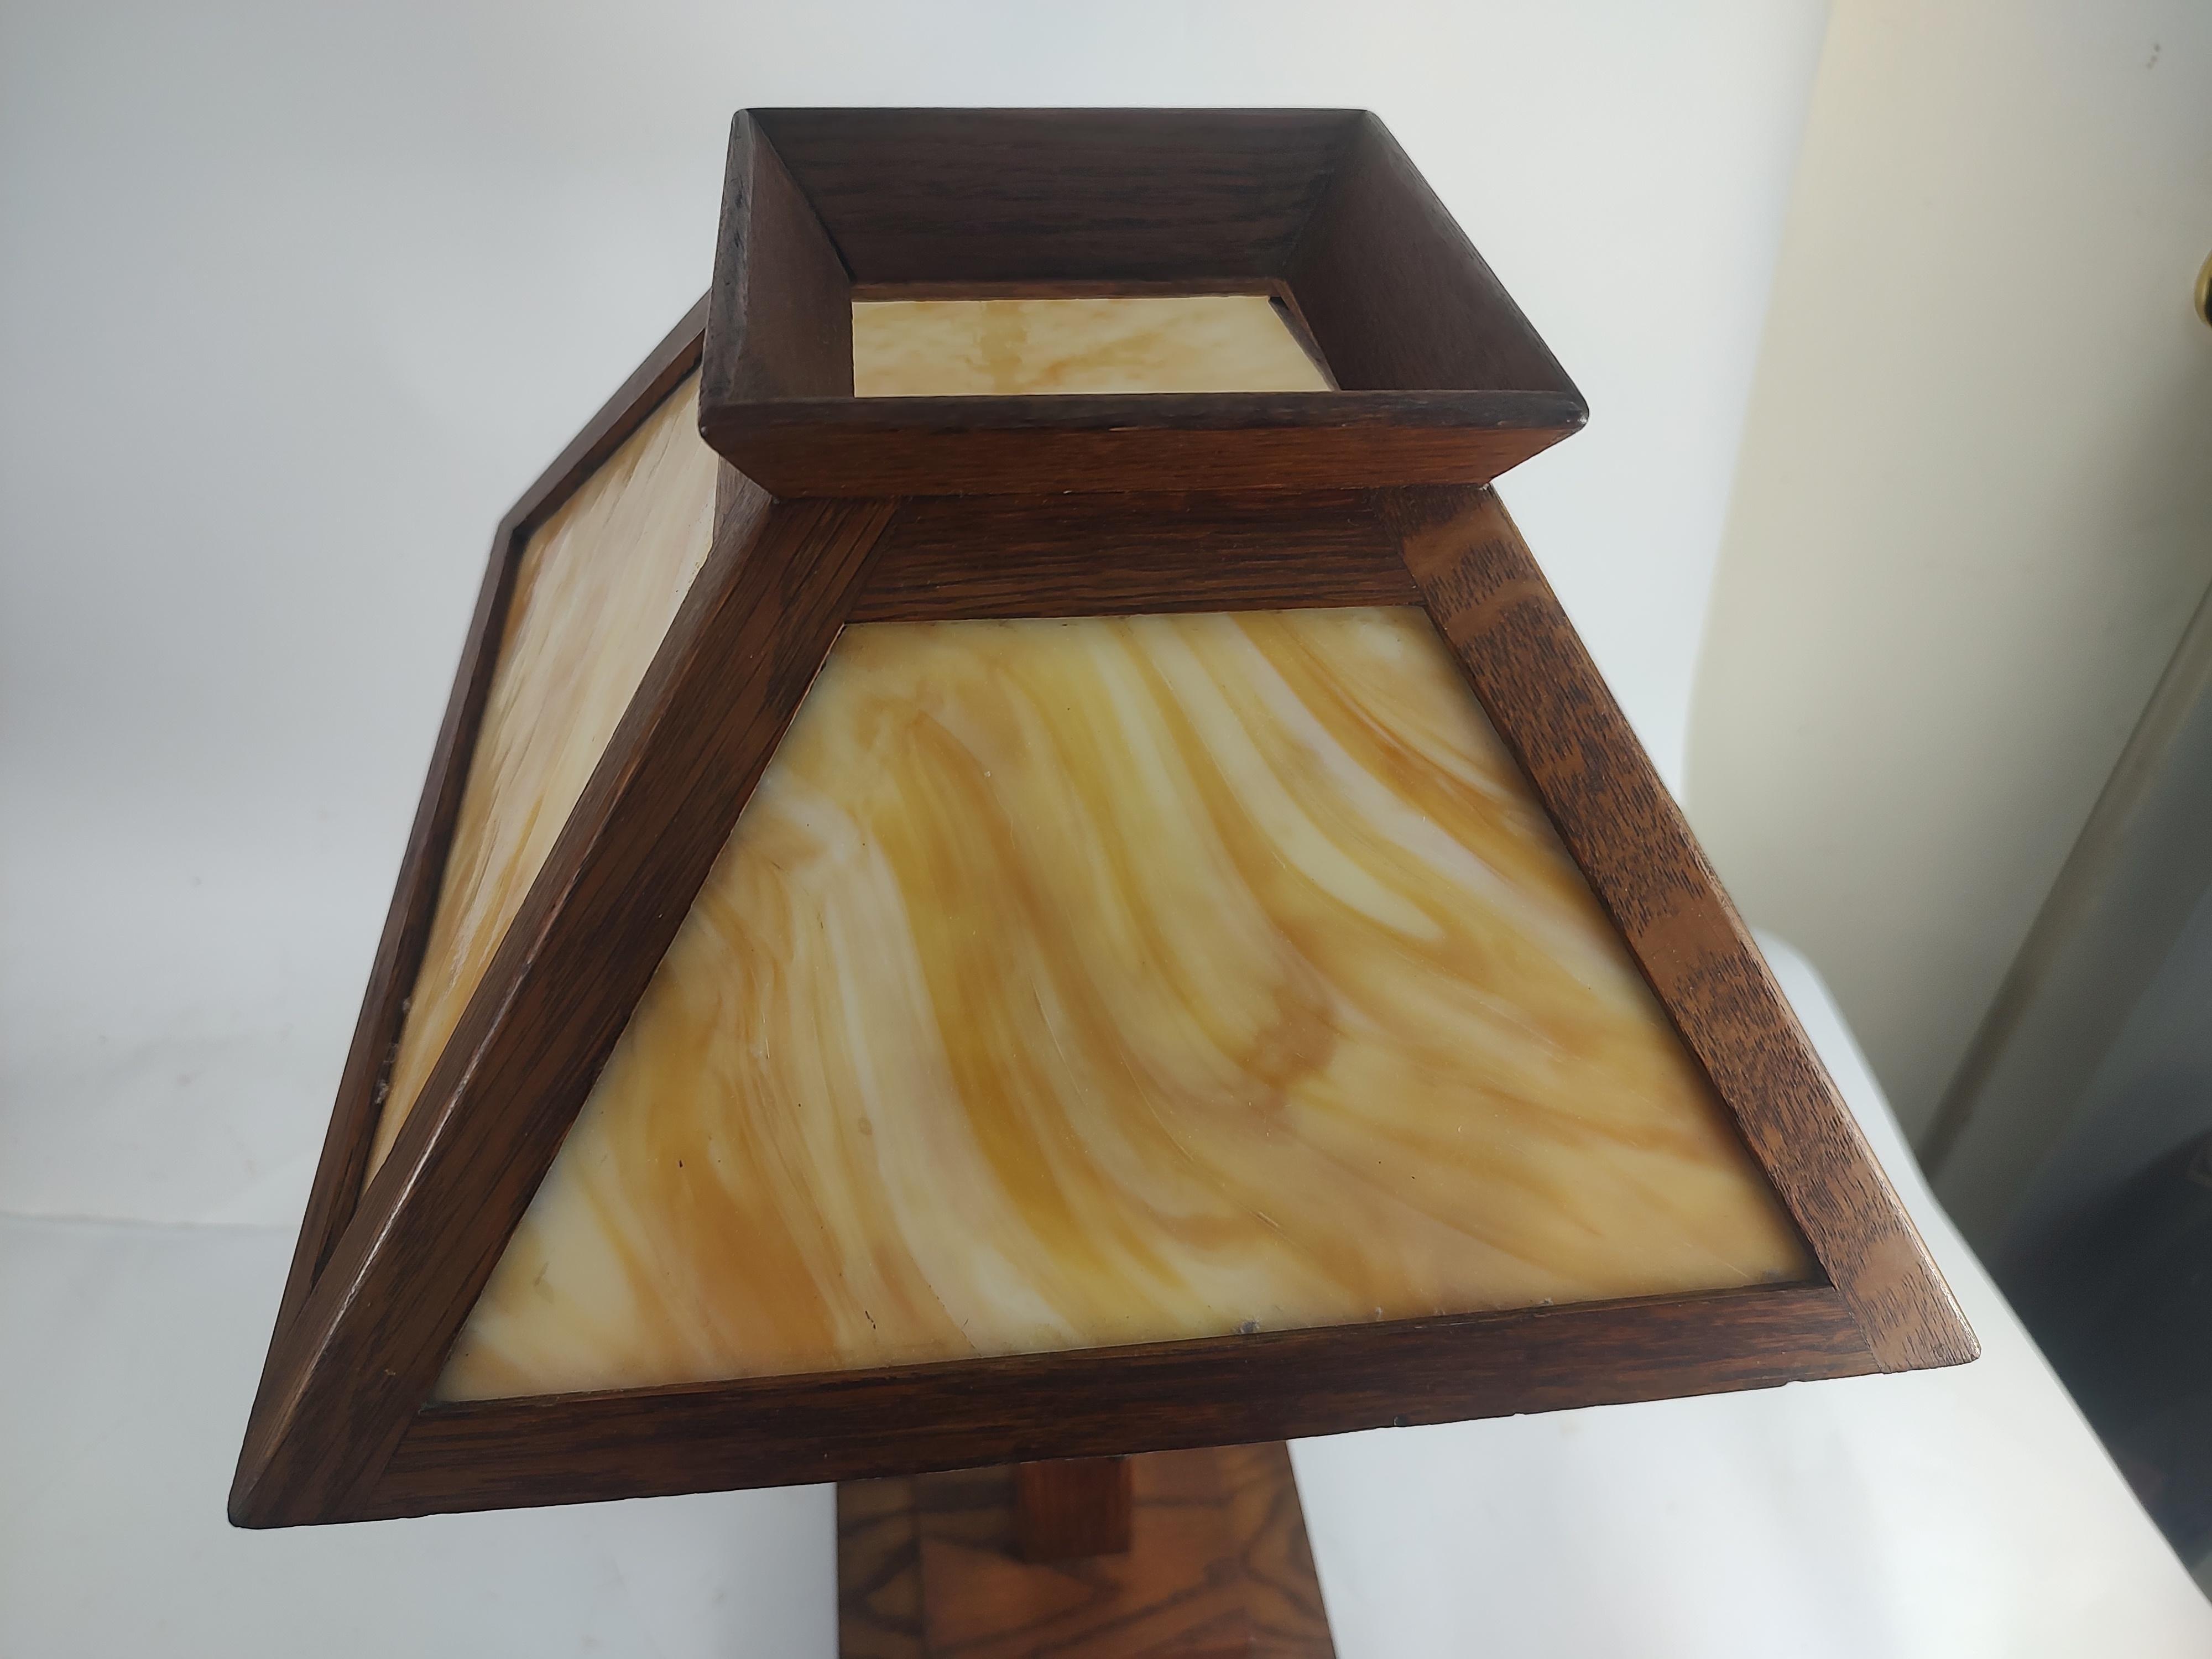 Early 20th Century Arts & Crafts Mission Oak with Carmel Colored Slag Glass Table Lamp C 1910 For Sale